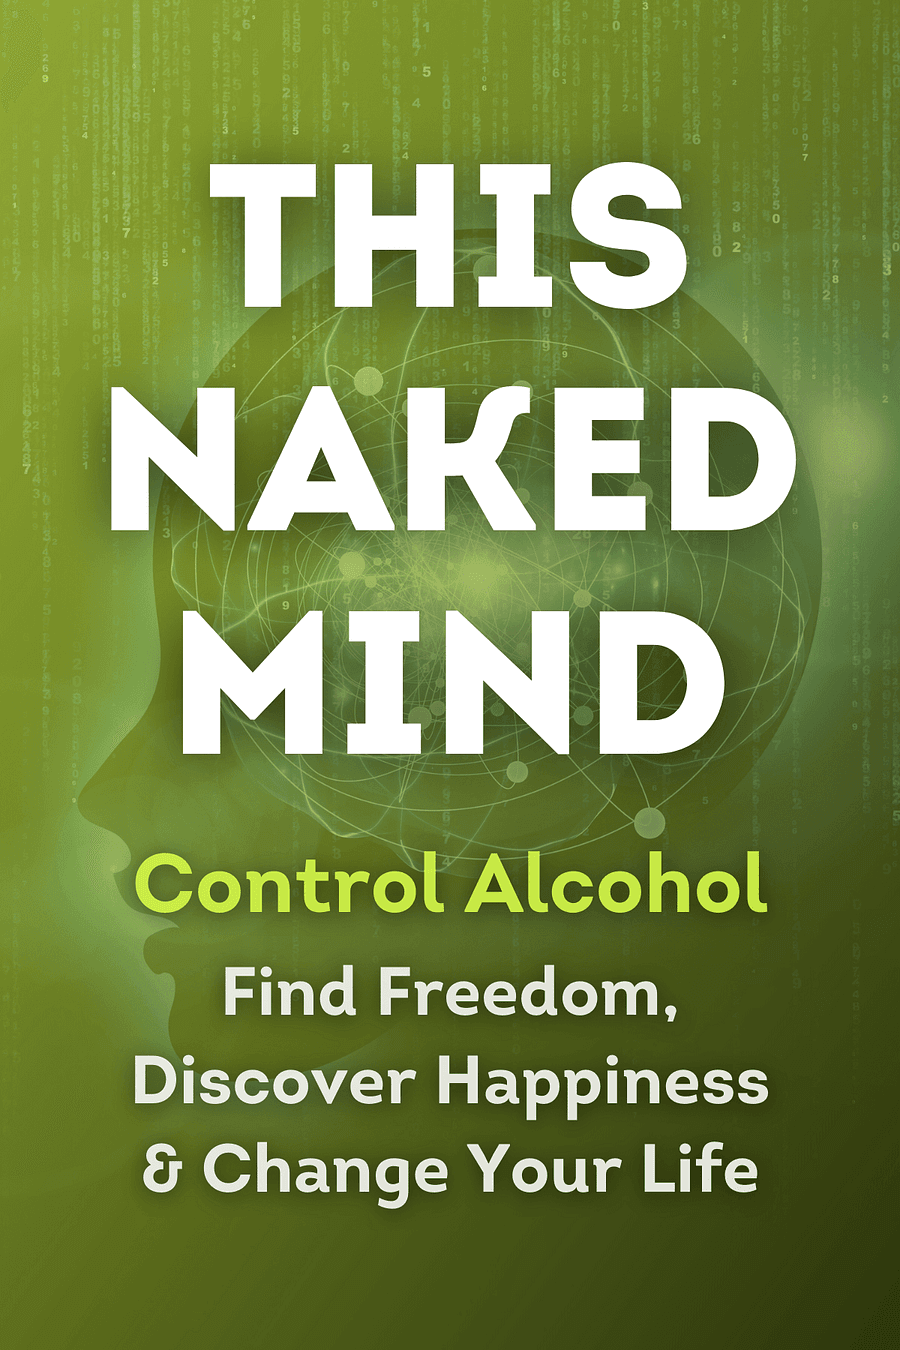 This Naked Mind by Annie Grace - Book Summary